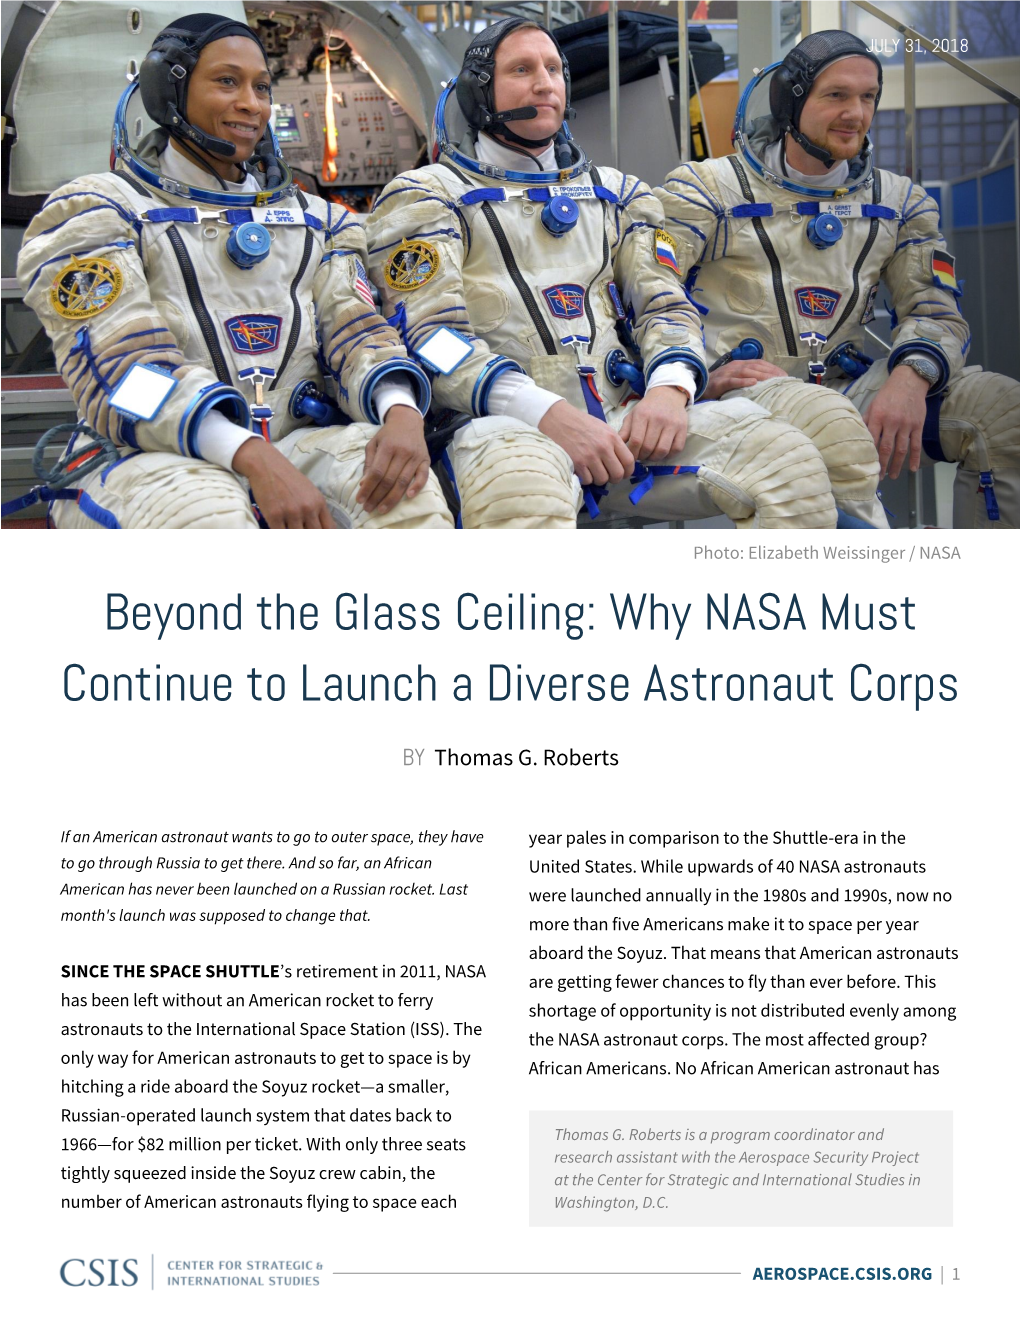 Beyond the Glass Ceiling: Why NASA Must Continue to Launch a Diverse Astronaut Corps